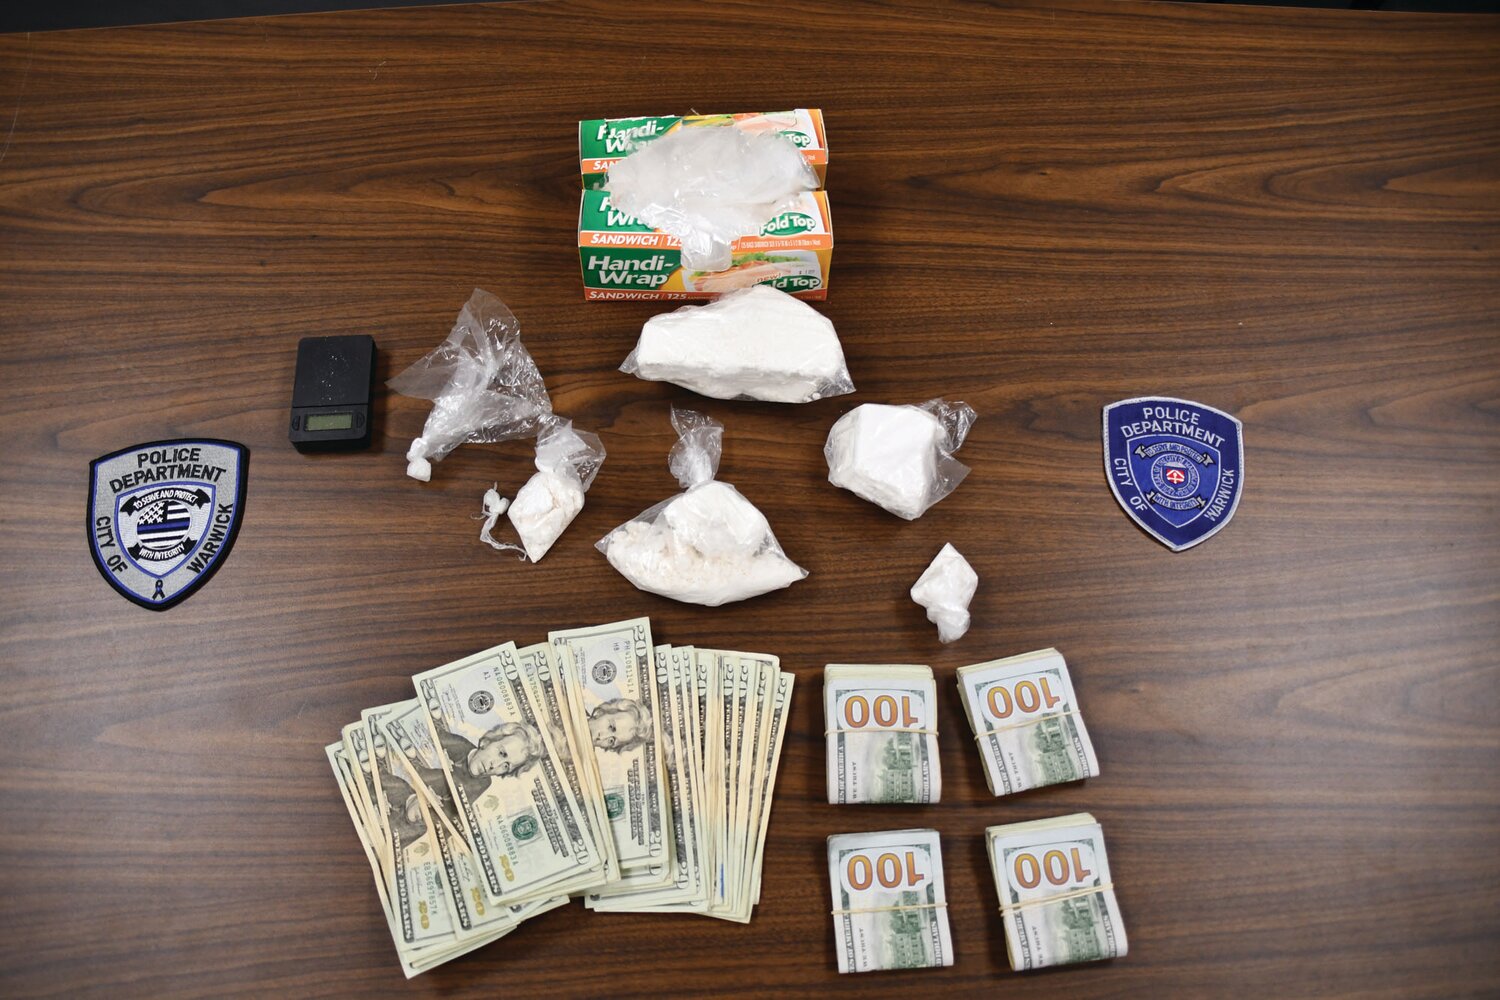 SEIZED: Warwick Police say they seized “17.1 ounces of cocaine, a sum of U.S. currency, and items related to the distribution of cocaine” during a raid at 29 Dan St. (Photo courtesy WPD)